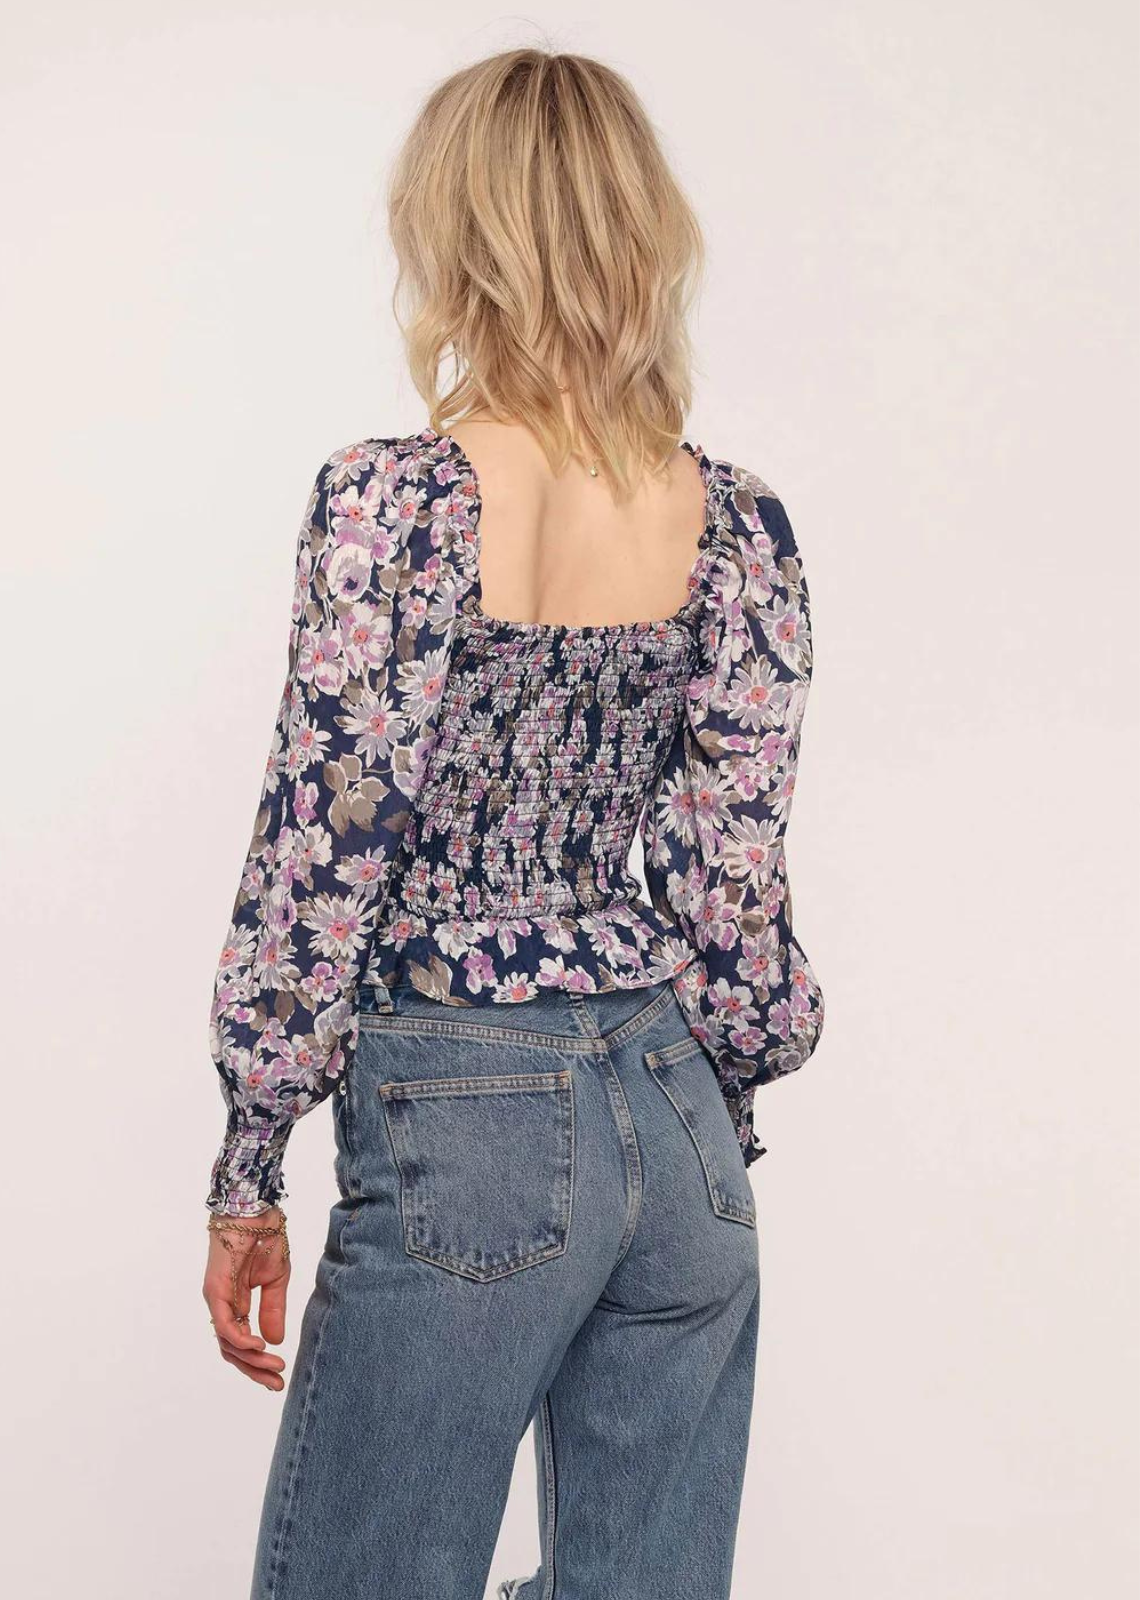 Heartloom Ariana Top. Our Ariana Top is effortlessly feminine. It has a softly ruched bodice and sweetheart neckline. The blouson sleeves and romantic floral print are perfect for date night.